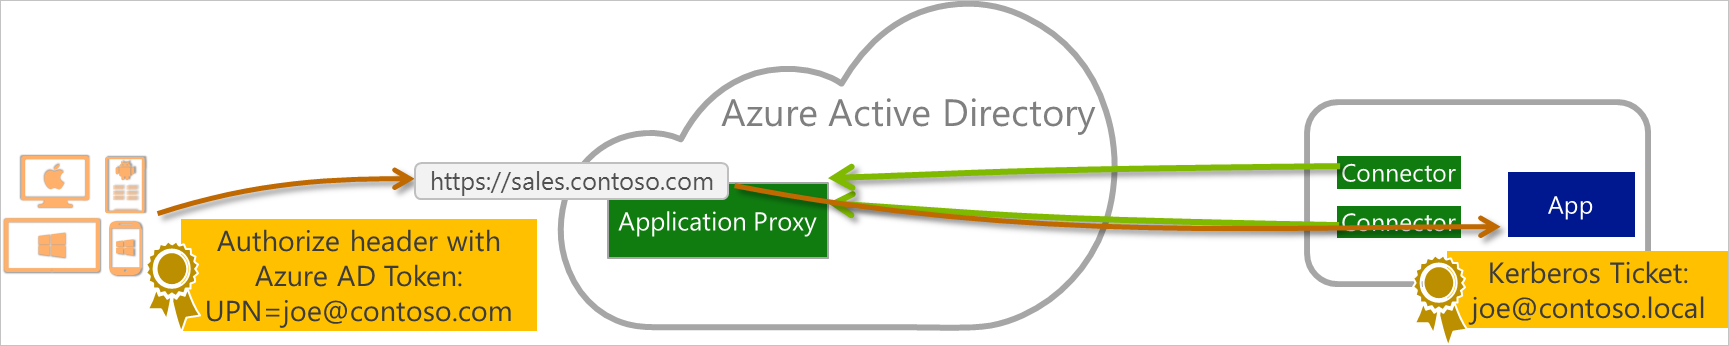 Relationship between end users, Azure AD, and published applications